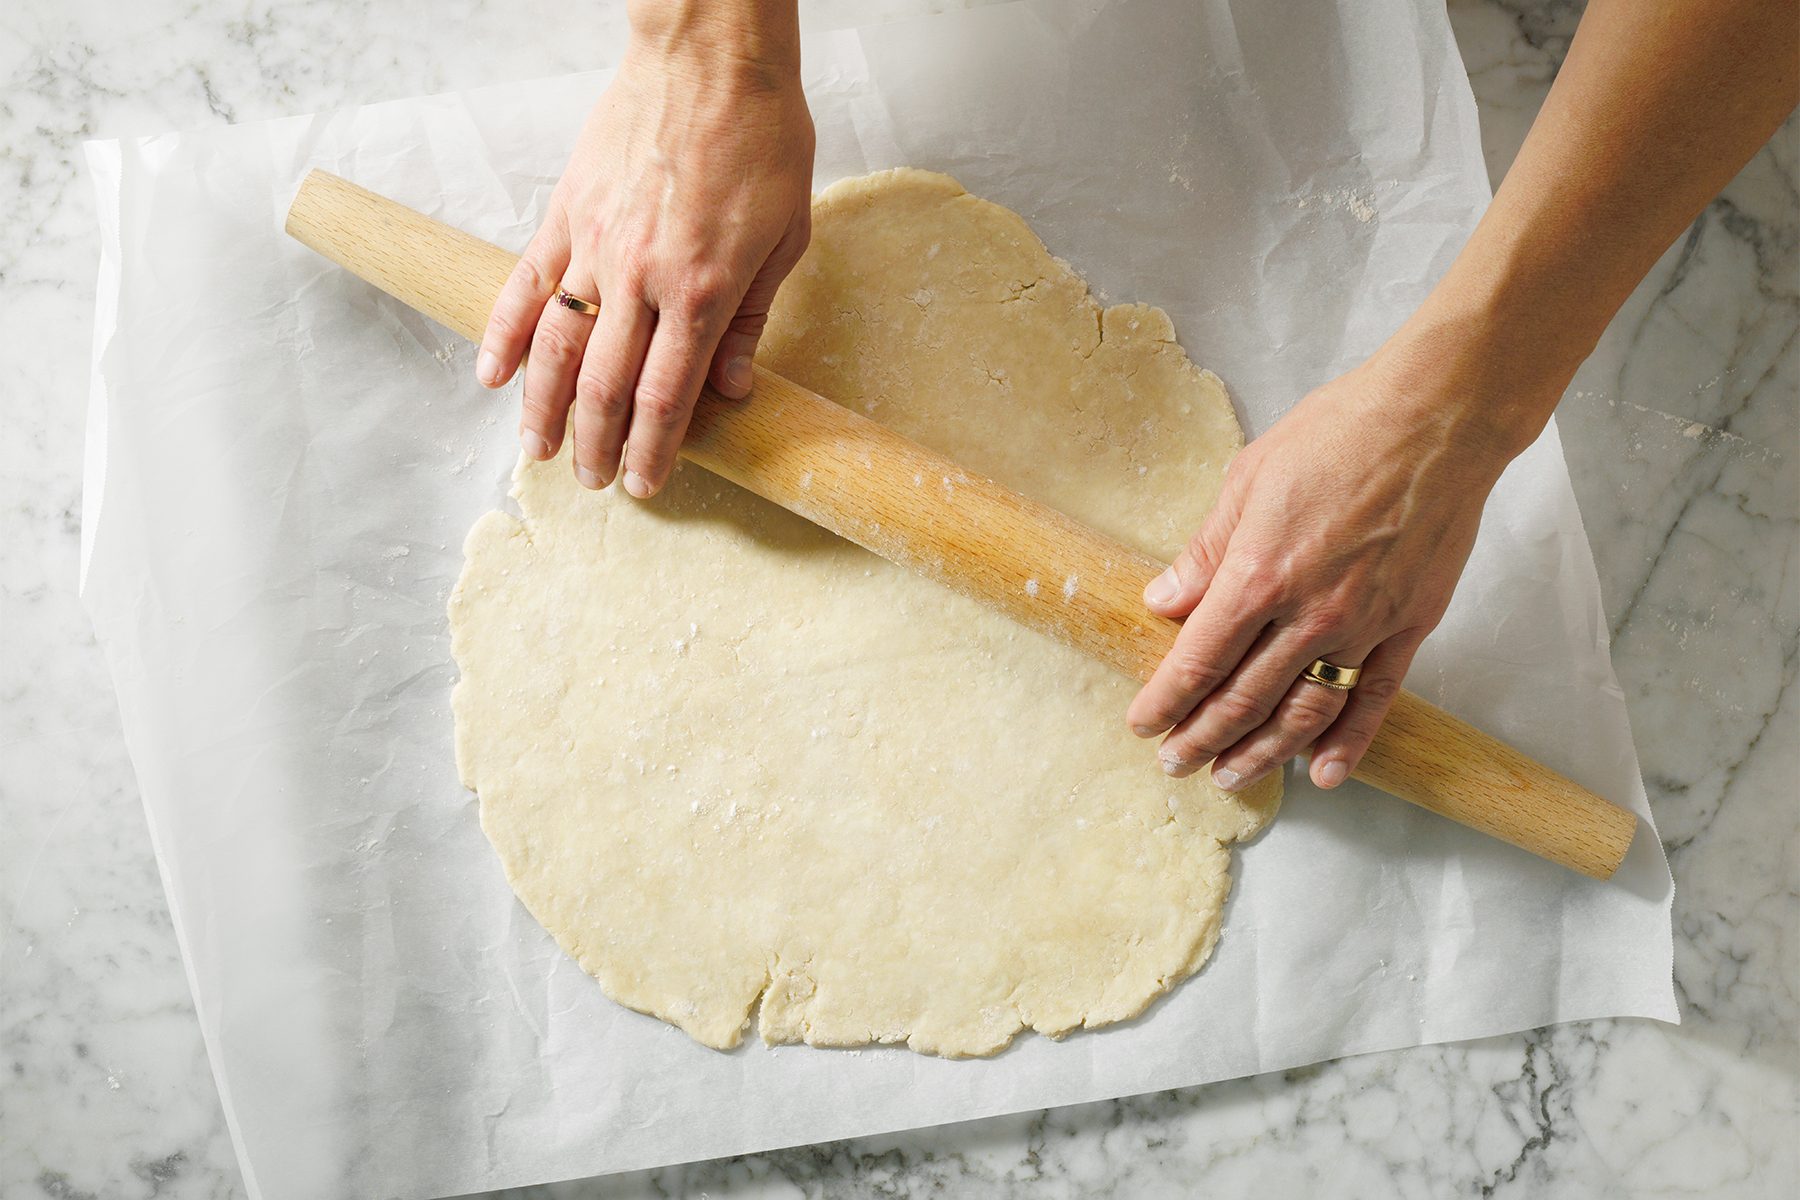 A person is rolling a dough